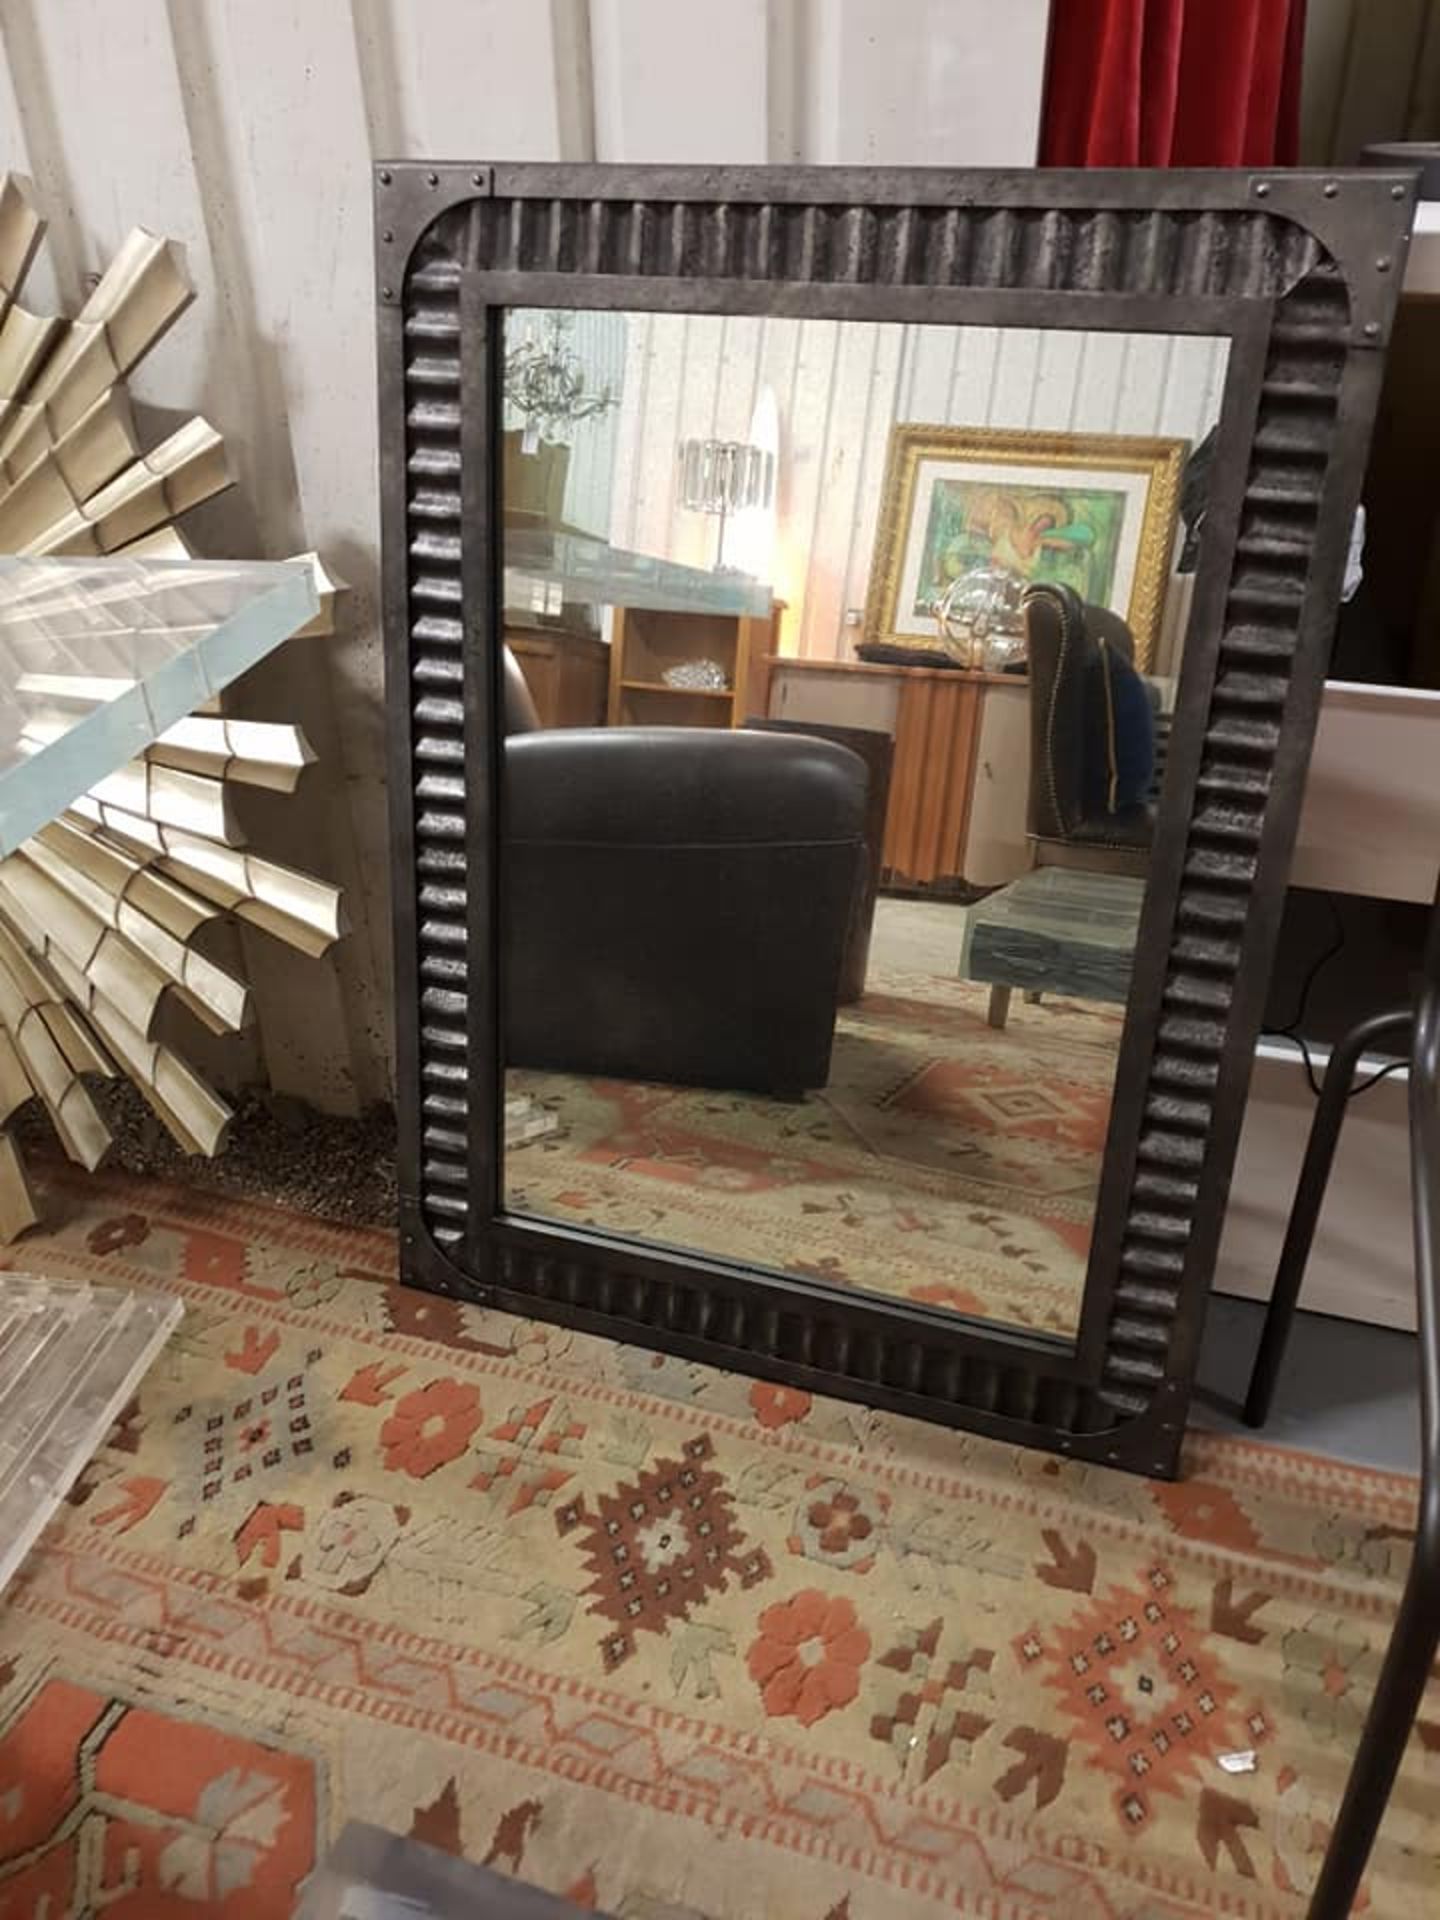 Beauhome Mirrors Jawa Mirror - Small 76.2 x 3.8 x 101.6 CM Material: Iron Frame + corrugated sheet - Image 2 of 2